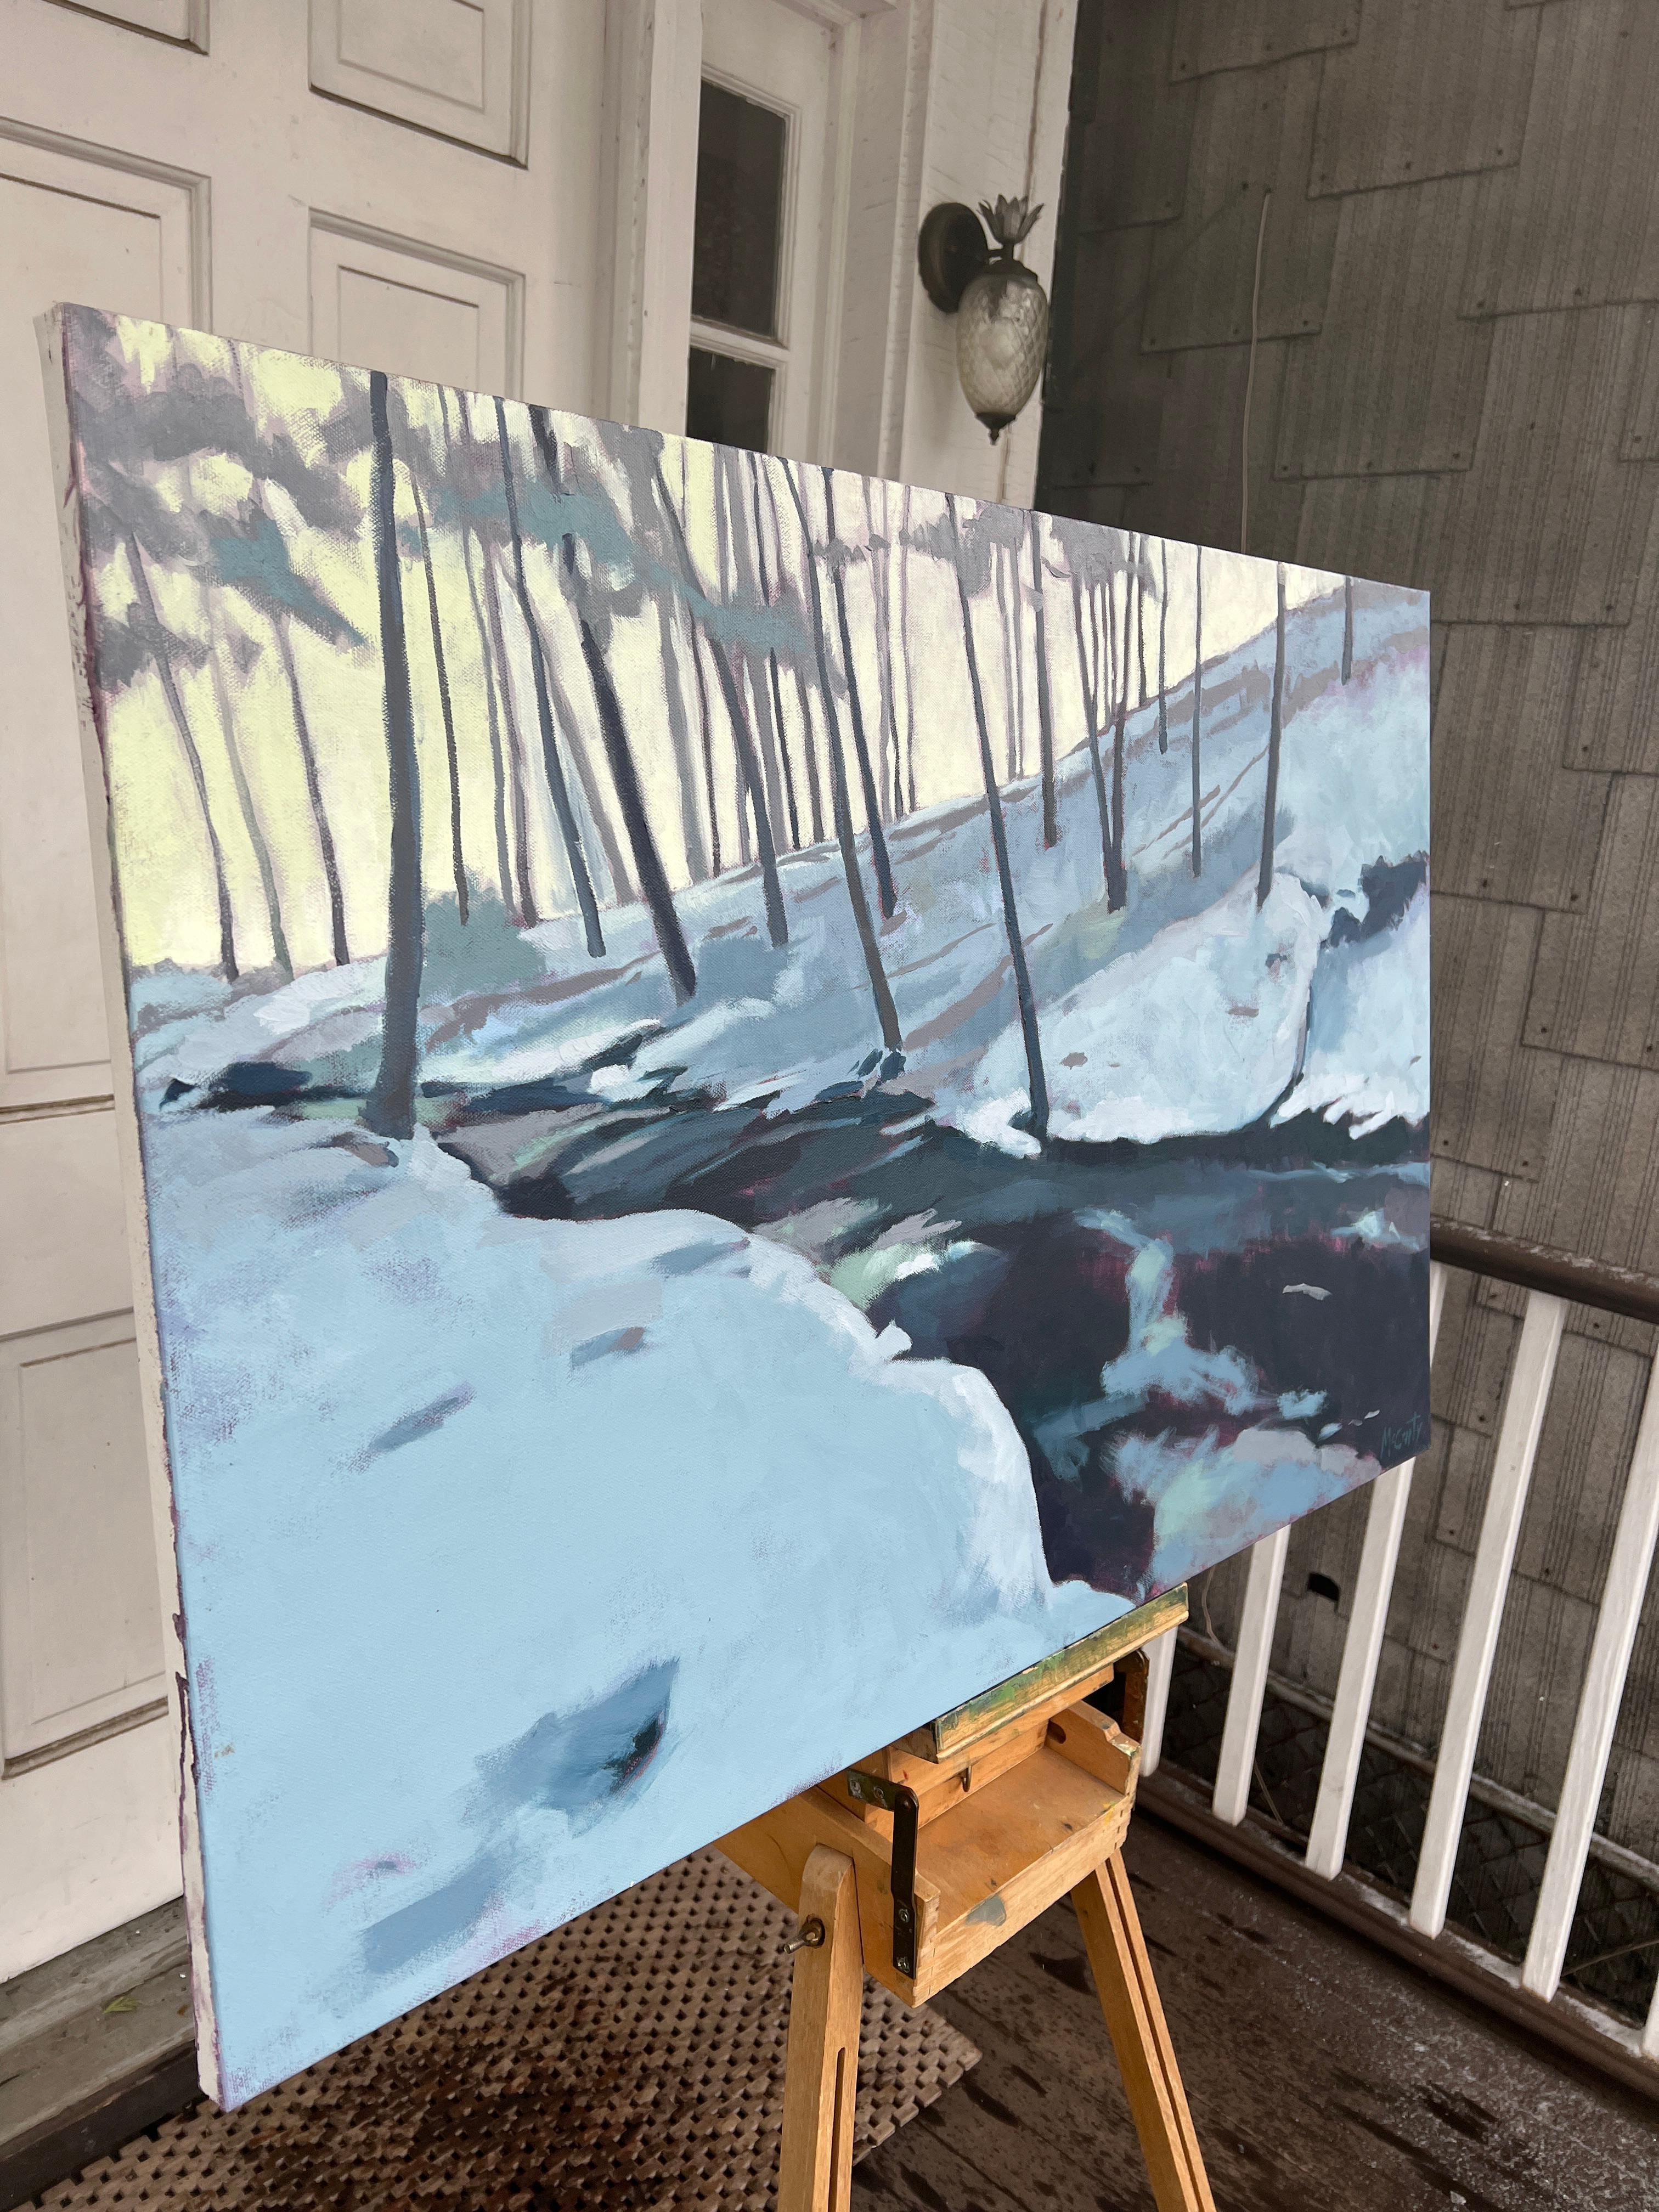 <p>Artist Comments<br>A classic image of winter unfolds in this stark portrayal of a mountain stream. Empty trees stand still along the snow-covered ground, while the water below lies frozen. The scene, though cold and still, emanates a beauty that